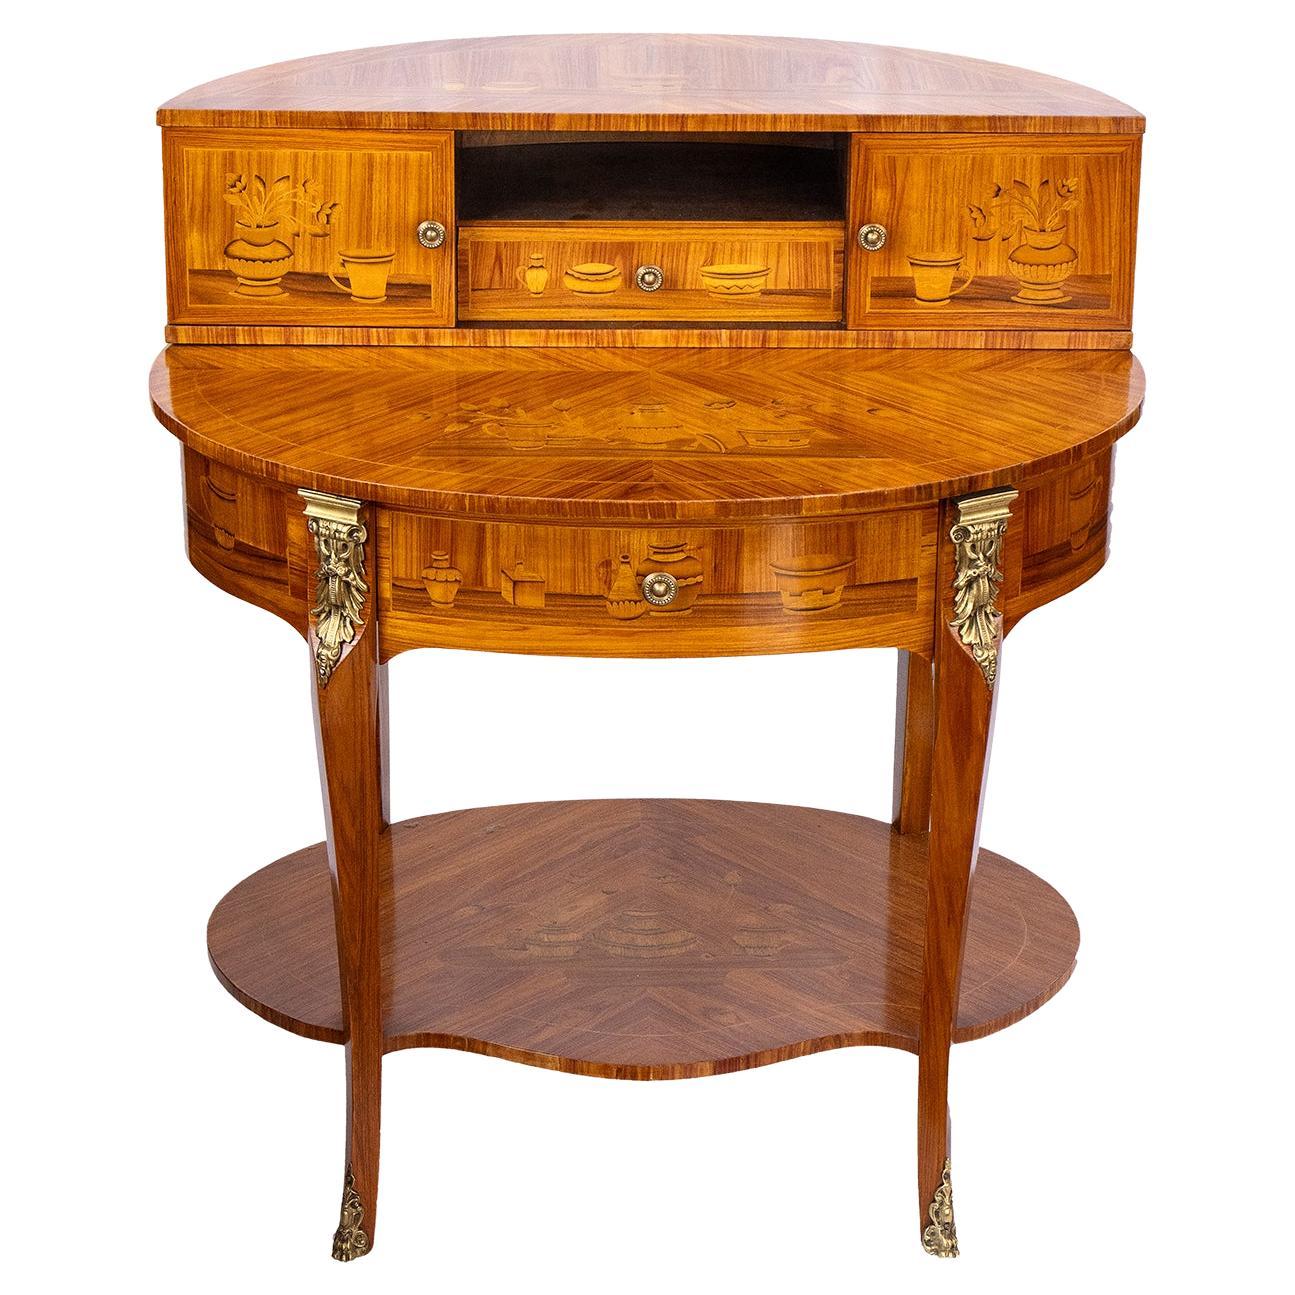 20th Century France Louis XV Kingwood Inlaid Marquetry Desk and Writing Table For Sale